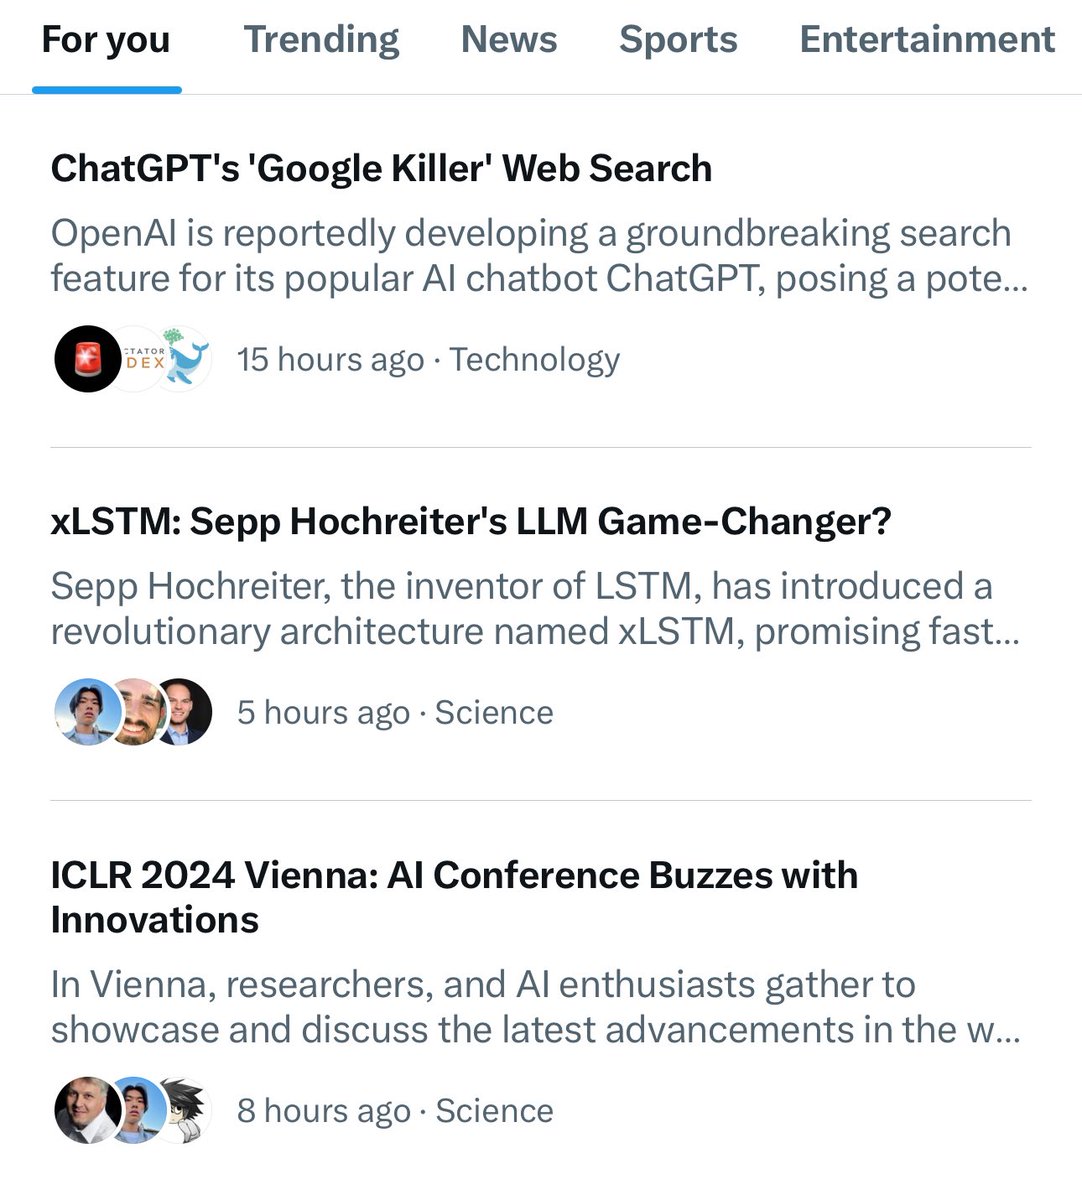 Groks “explore” Twitter trending topic summary headlines are wishy-washy, sometimes have hallucinations, and are open to manipulation. Surprisingly, though, I am finding them quite useful & much better than the old non-AI methods, once you know the limitations. AI in a nutshell.